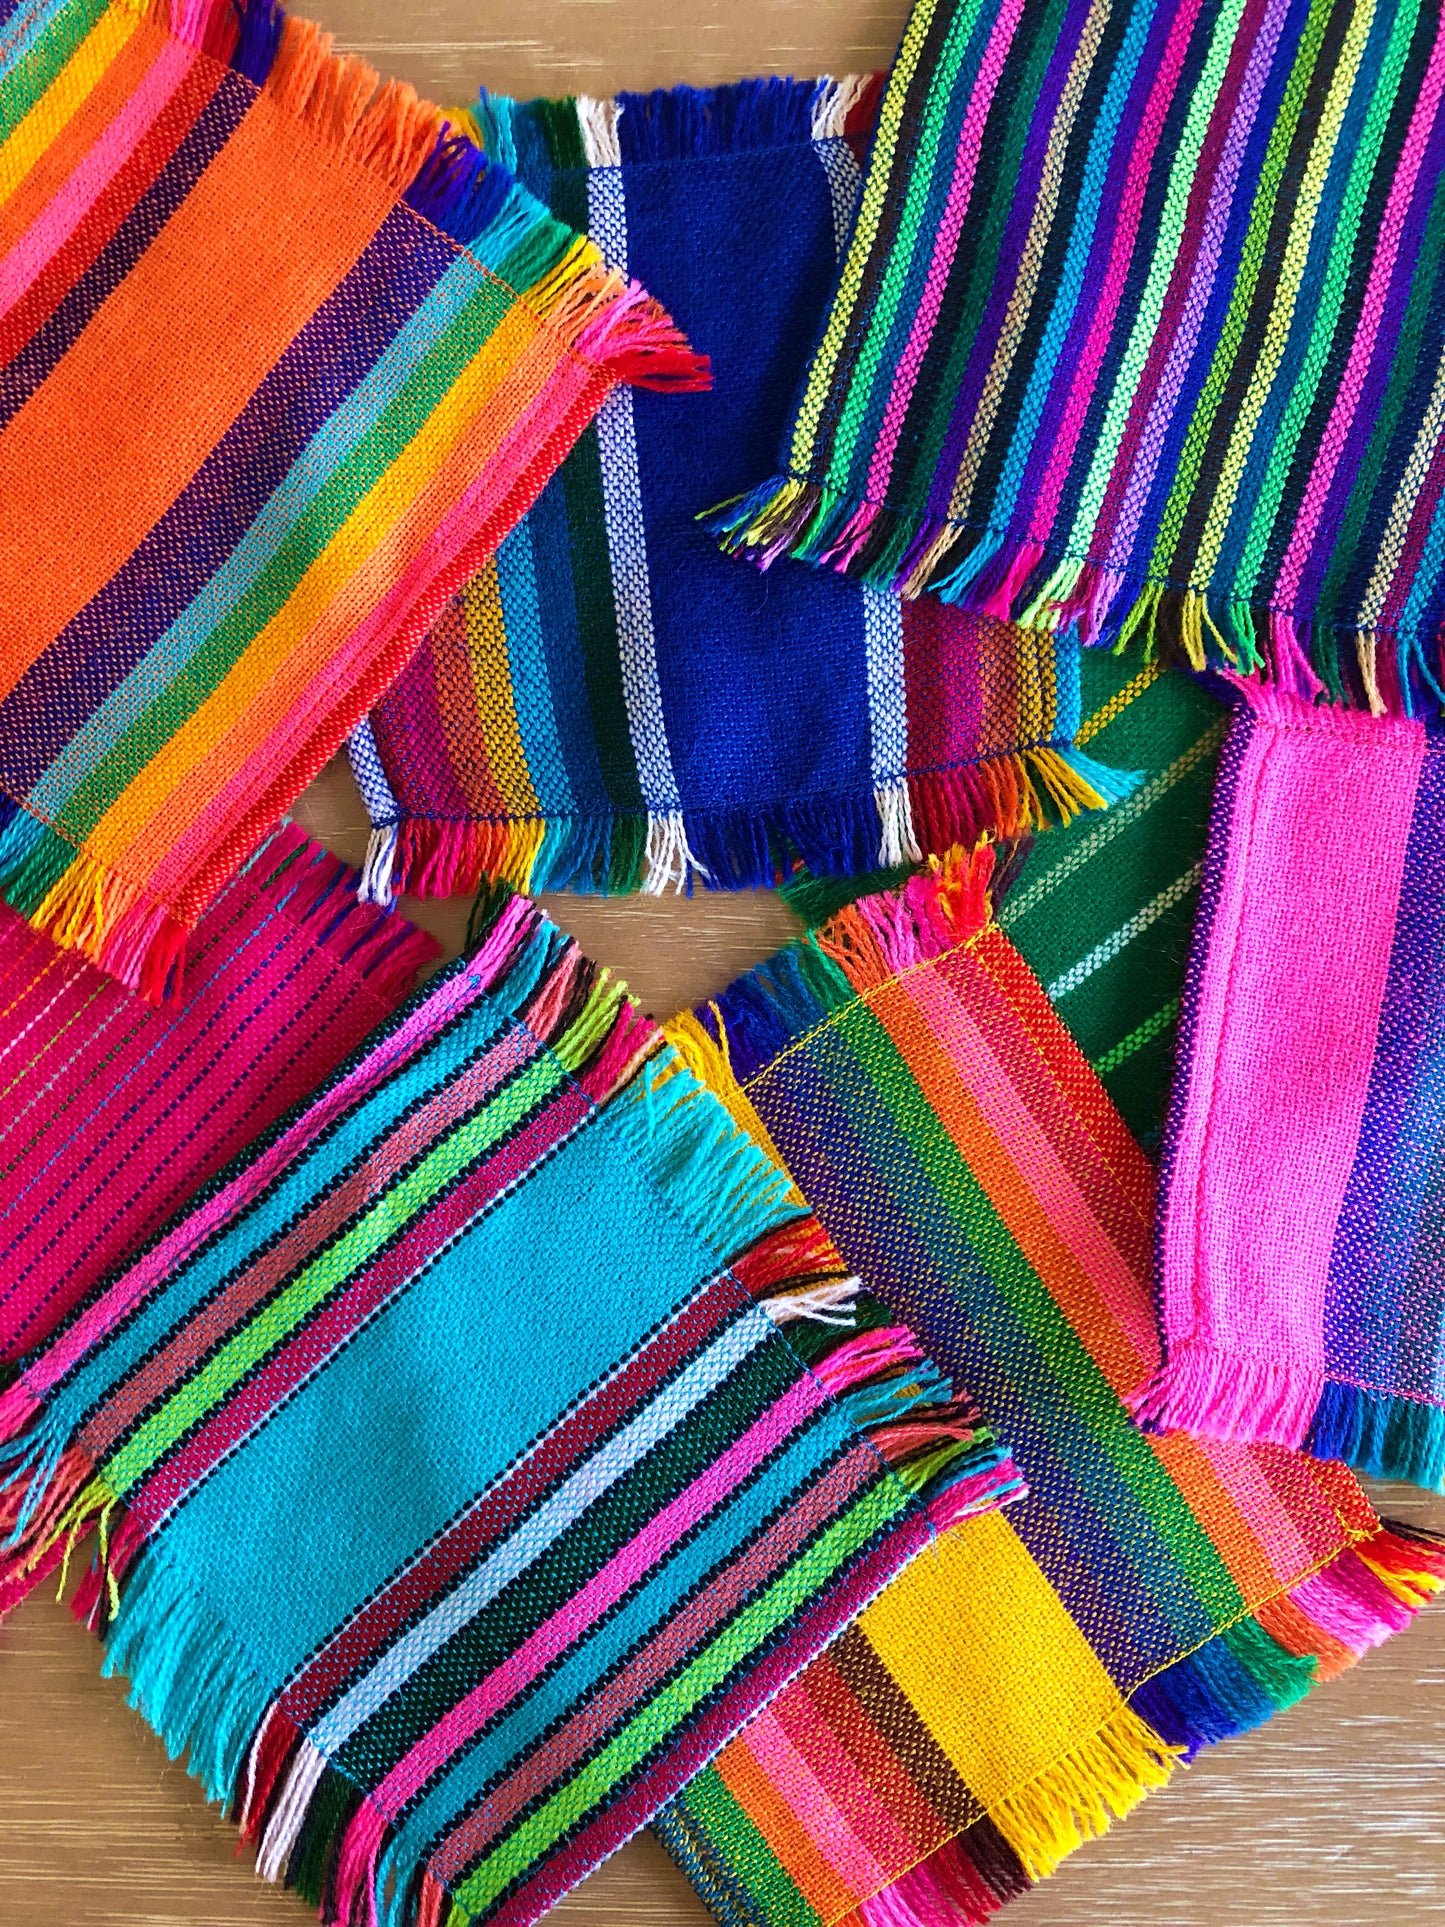 Mexican Fabric COCKTAIL napkins, Bulk Set of 6 striped assorted colors